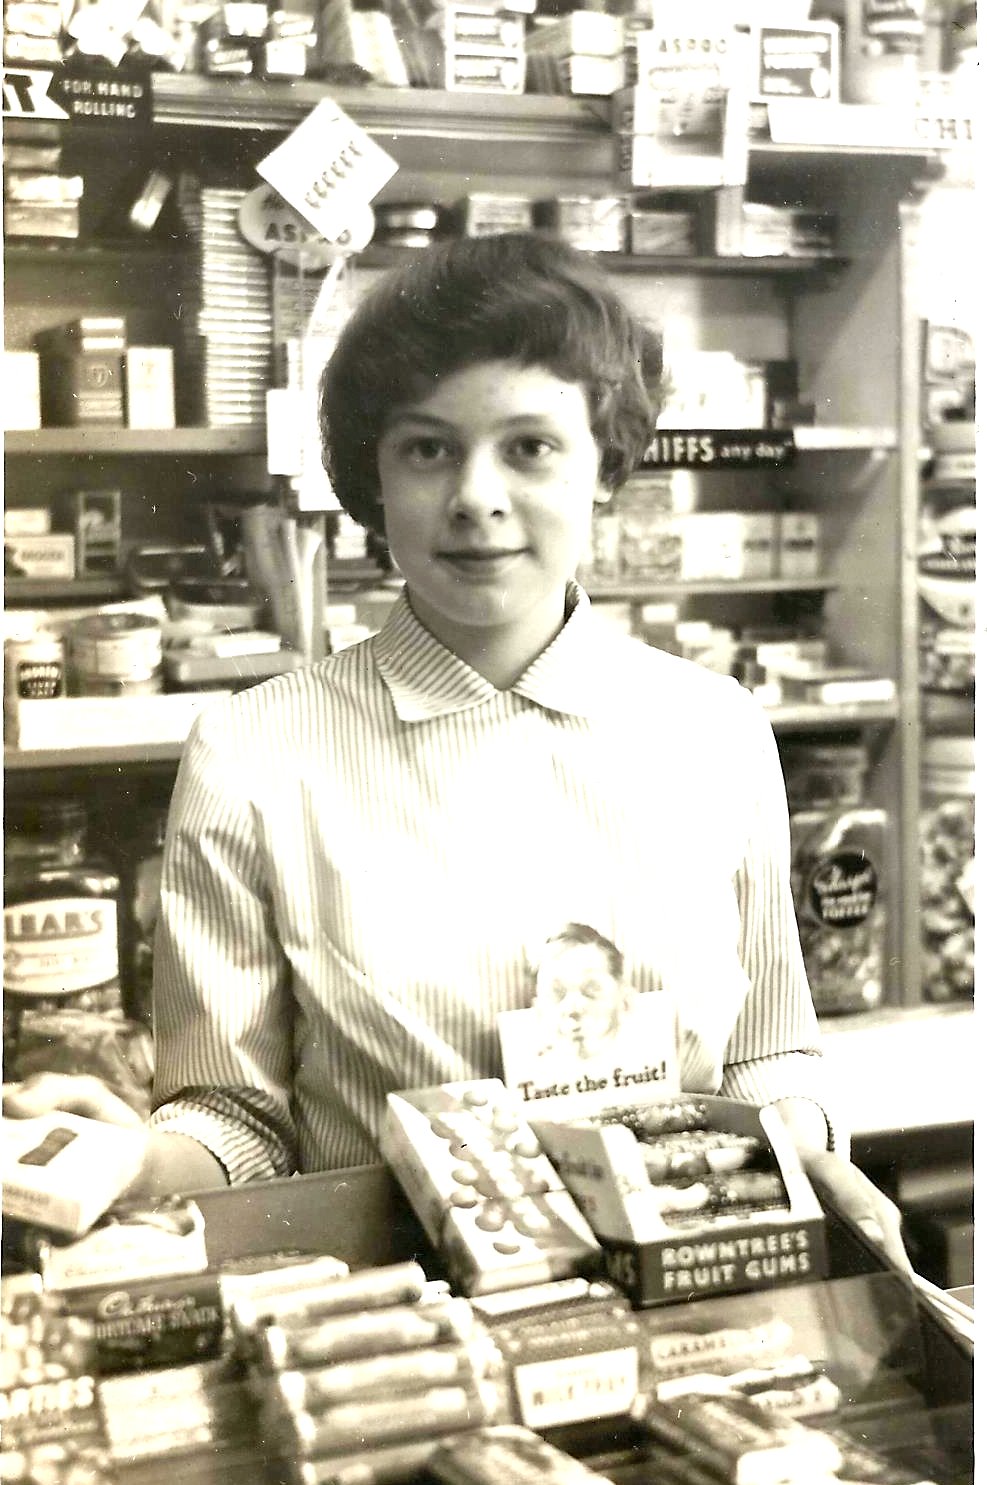 The author at her parents’ shop in 1958